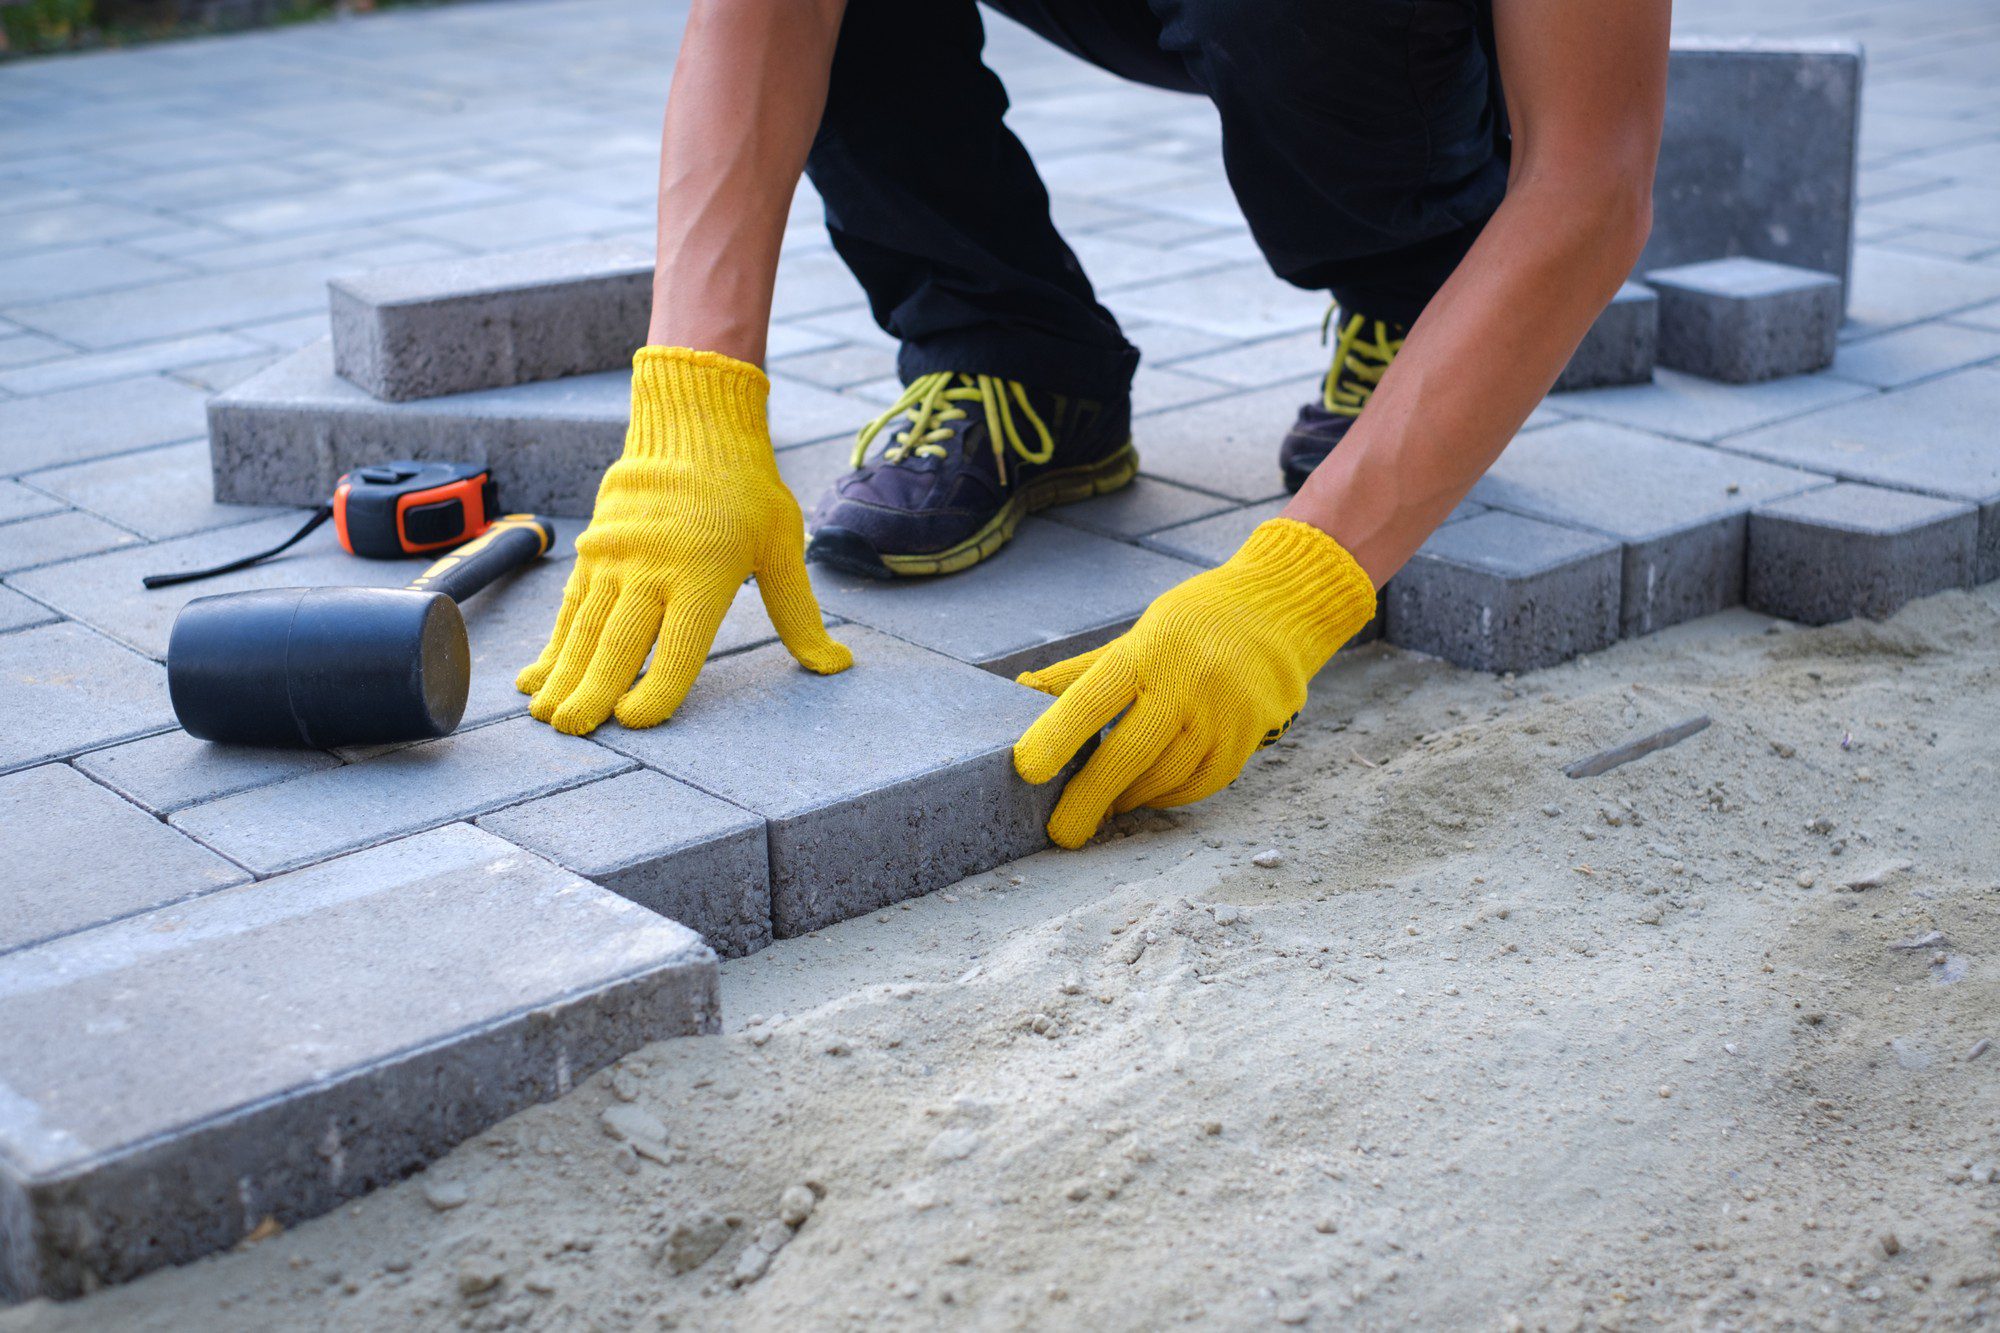 The image shows a person laying paving stones on a prepared sand base. The person is wearing yellow work gloves, and we can see them placing a paving stone into position on the ground. In the background, there are additional paving stones and a mallet, commonly used for tapping the stones into place, alongside a tape measure, which is likely used for accurate placement and spacing of the stones. The person is wearing casual sports shoes and seems to be engaged in outdoor construction or landscaping work. The focus is on the hands and the pavers, indicating the manual labour aspect of the task.